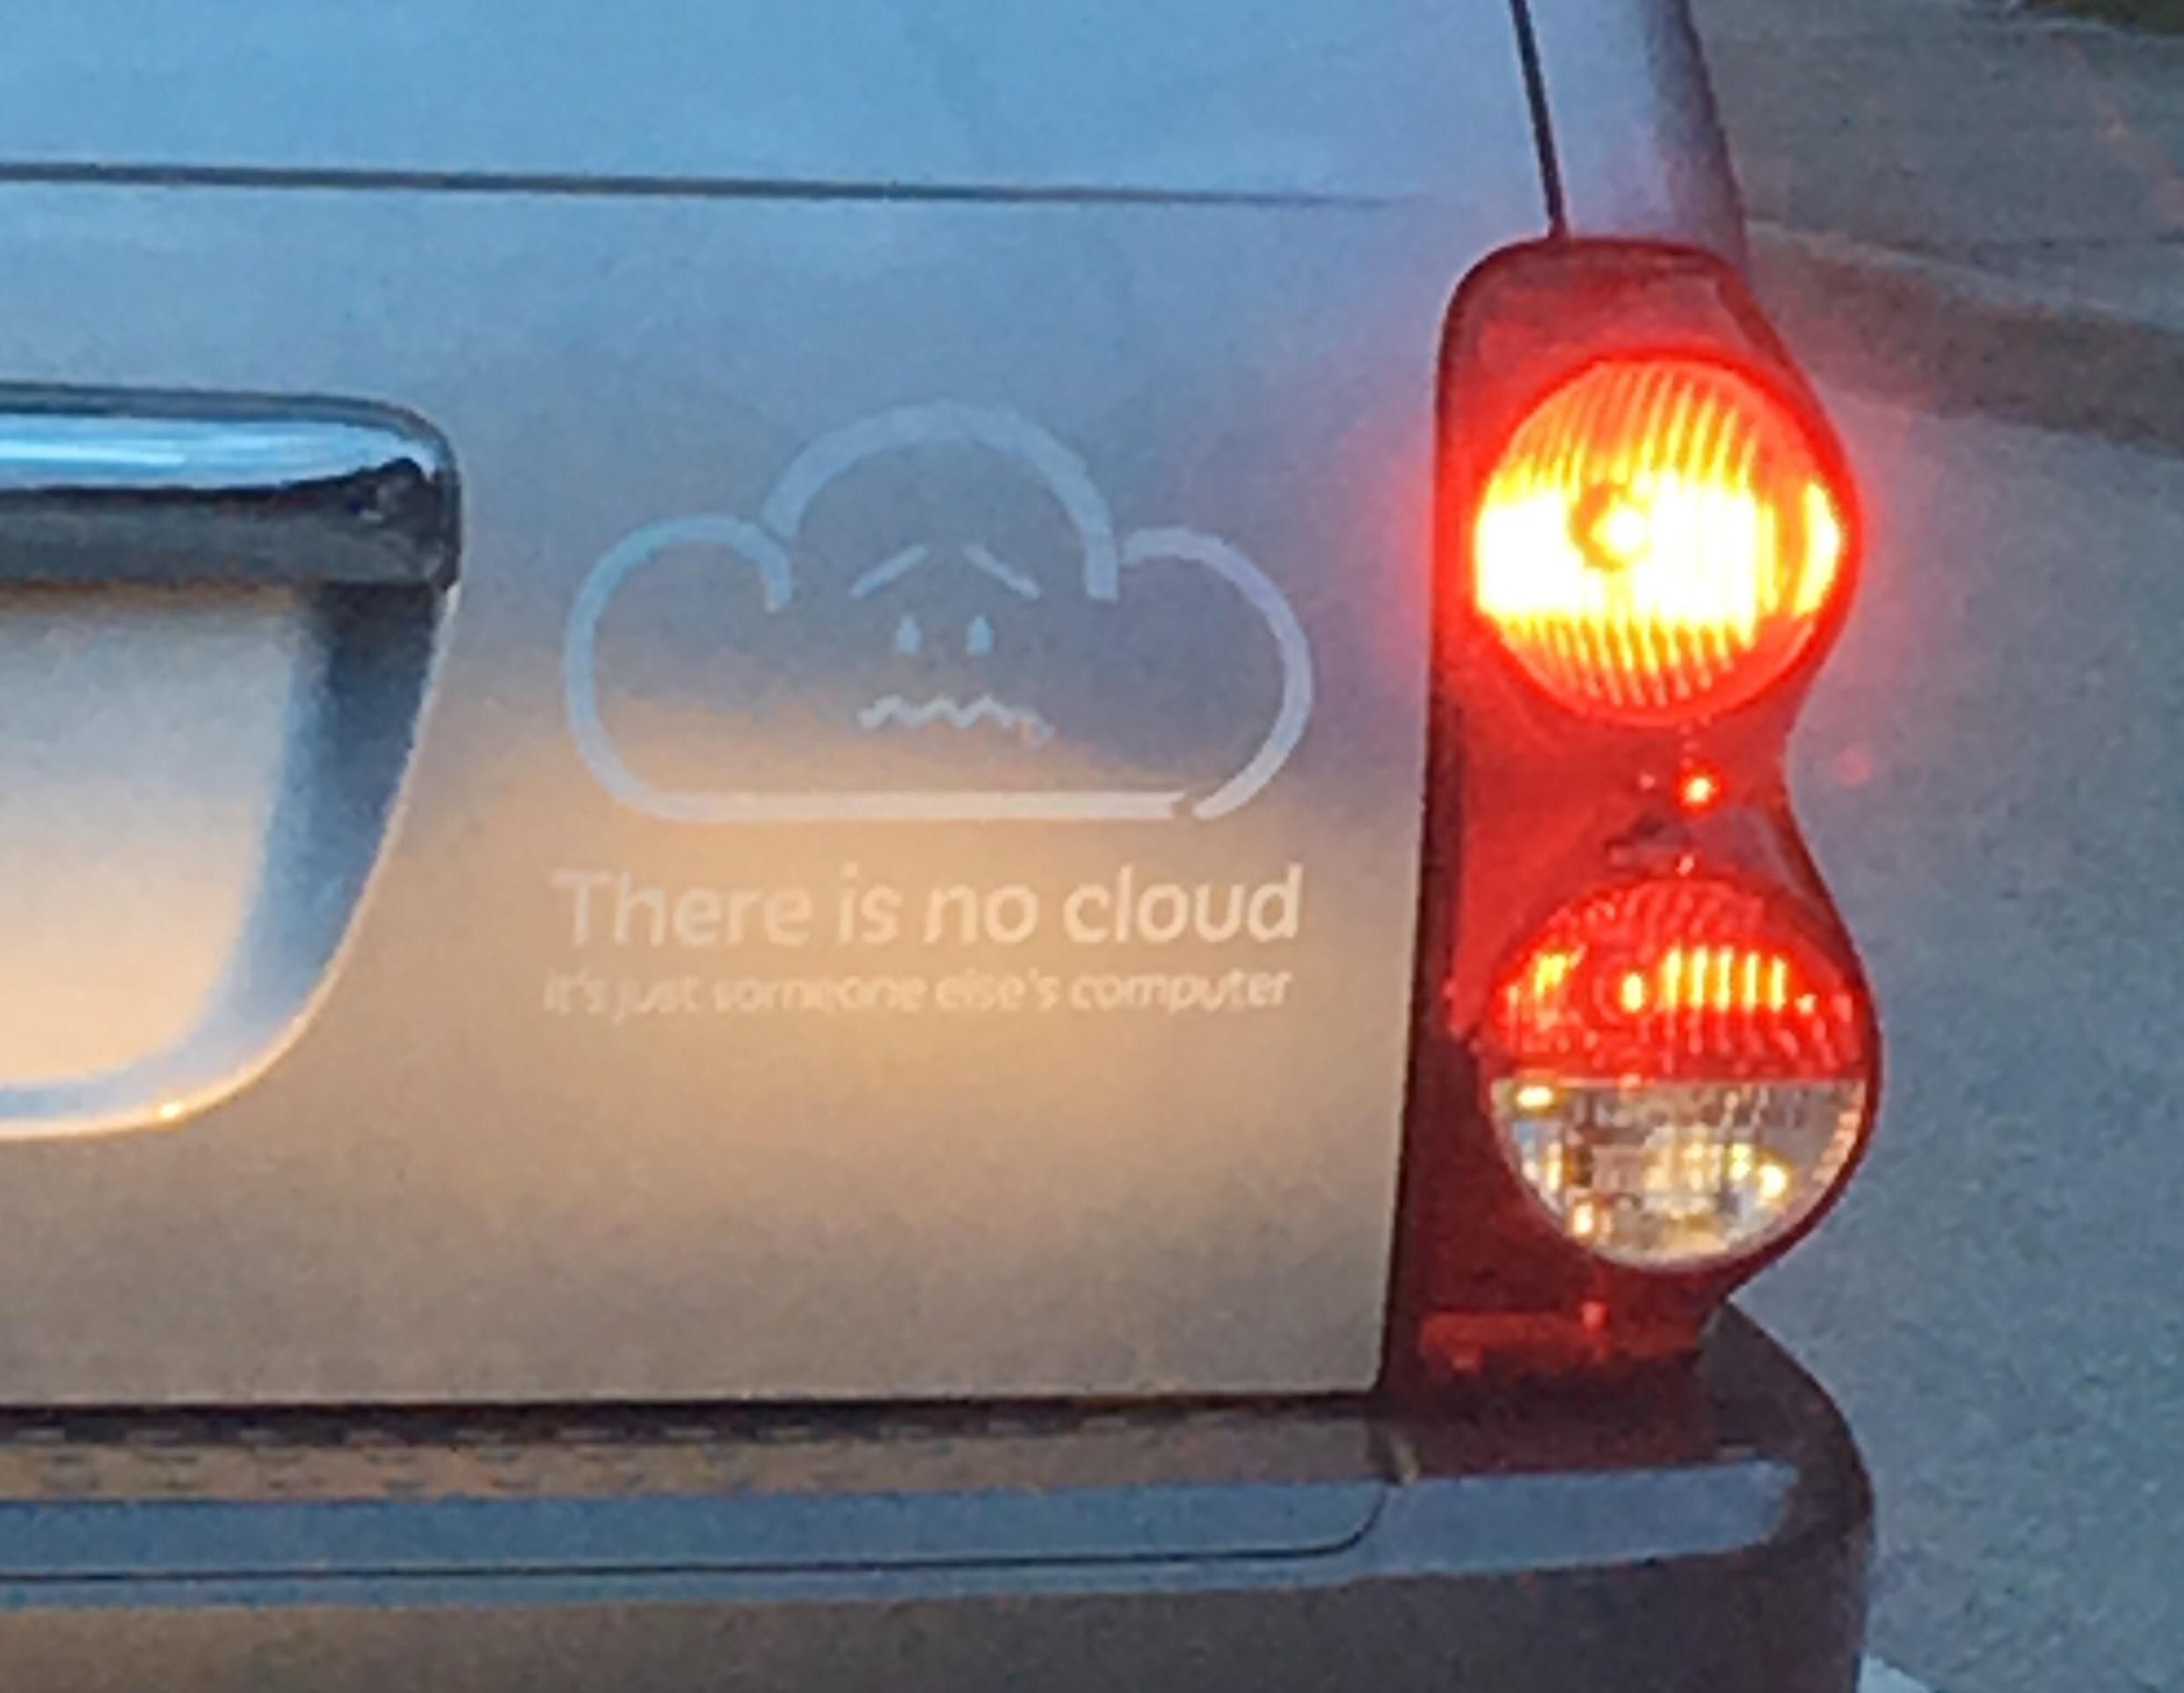 "There is no cloud, it's just someone else's computer." Laughed too hard at this in traffic today.